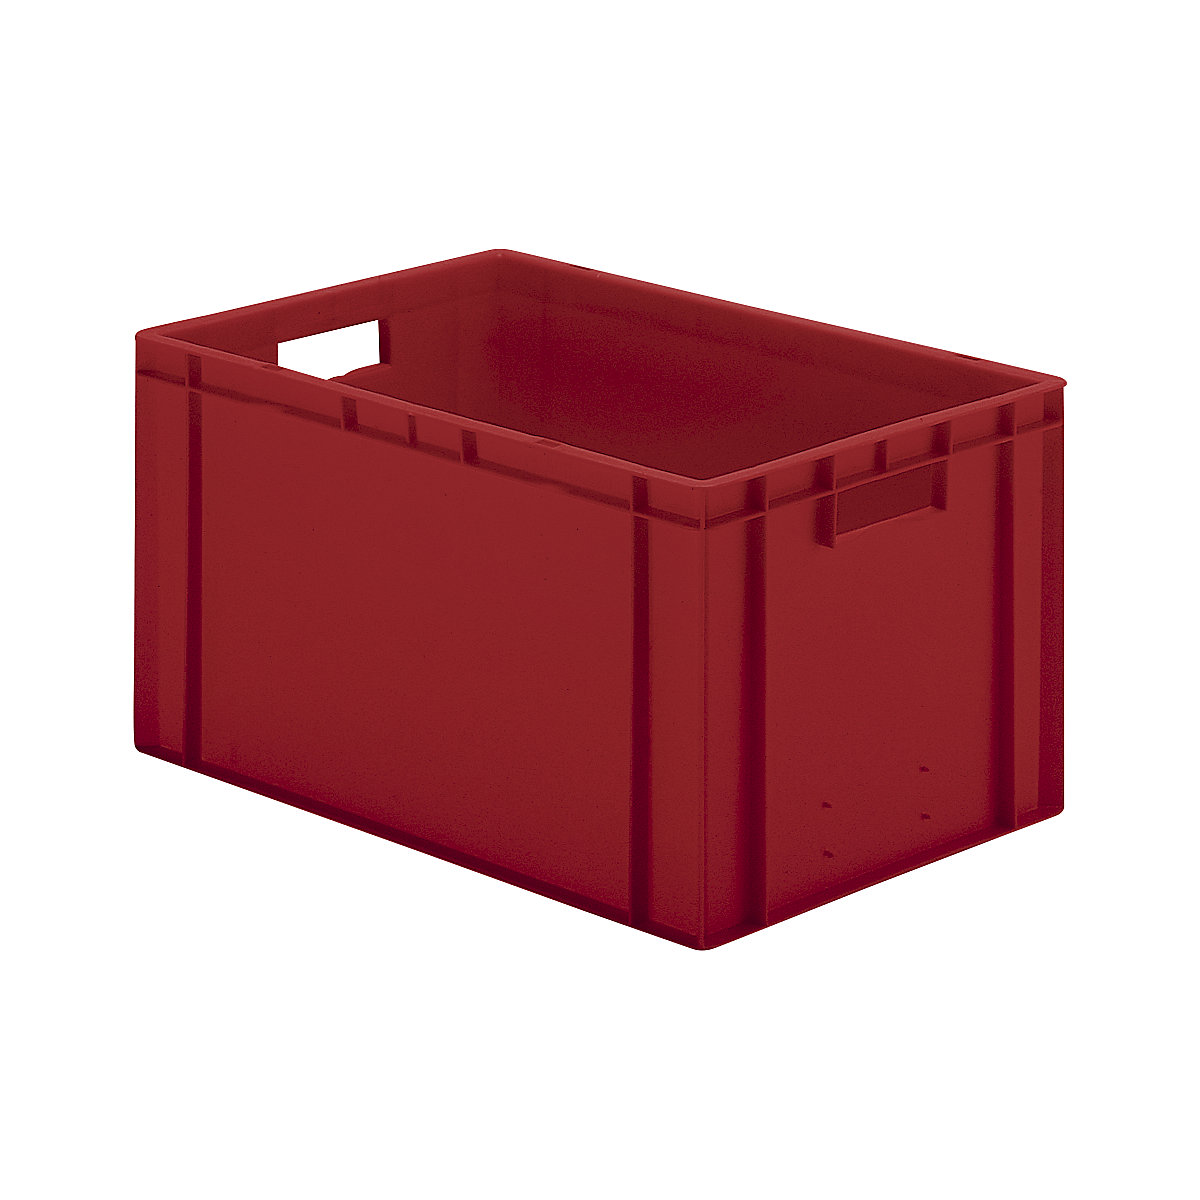 Euro stacking container, closed walls and base, LxWxH 600 x 400 x 320 mm, red, pack of 5